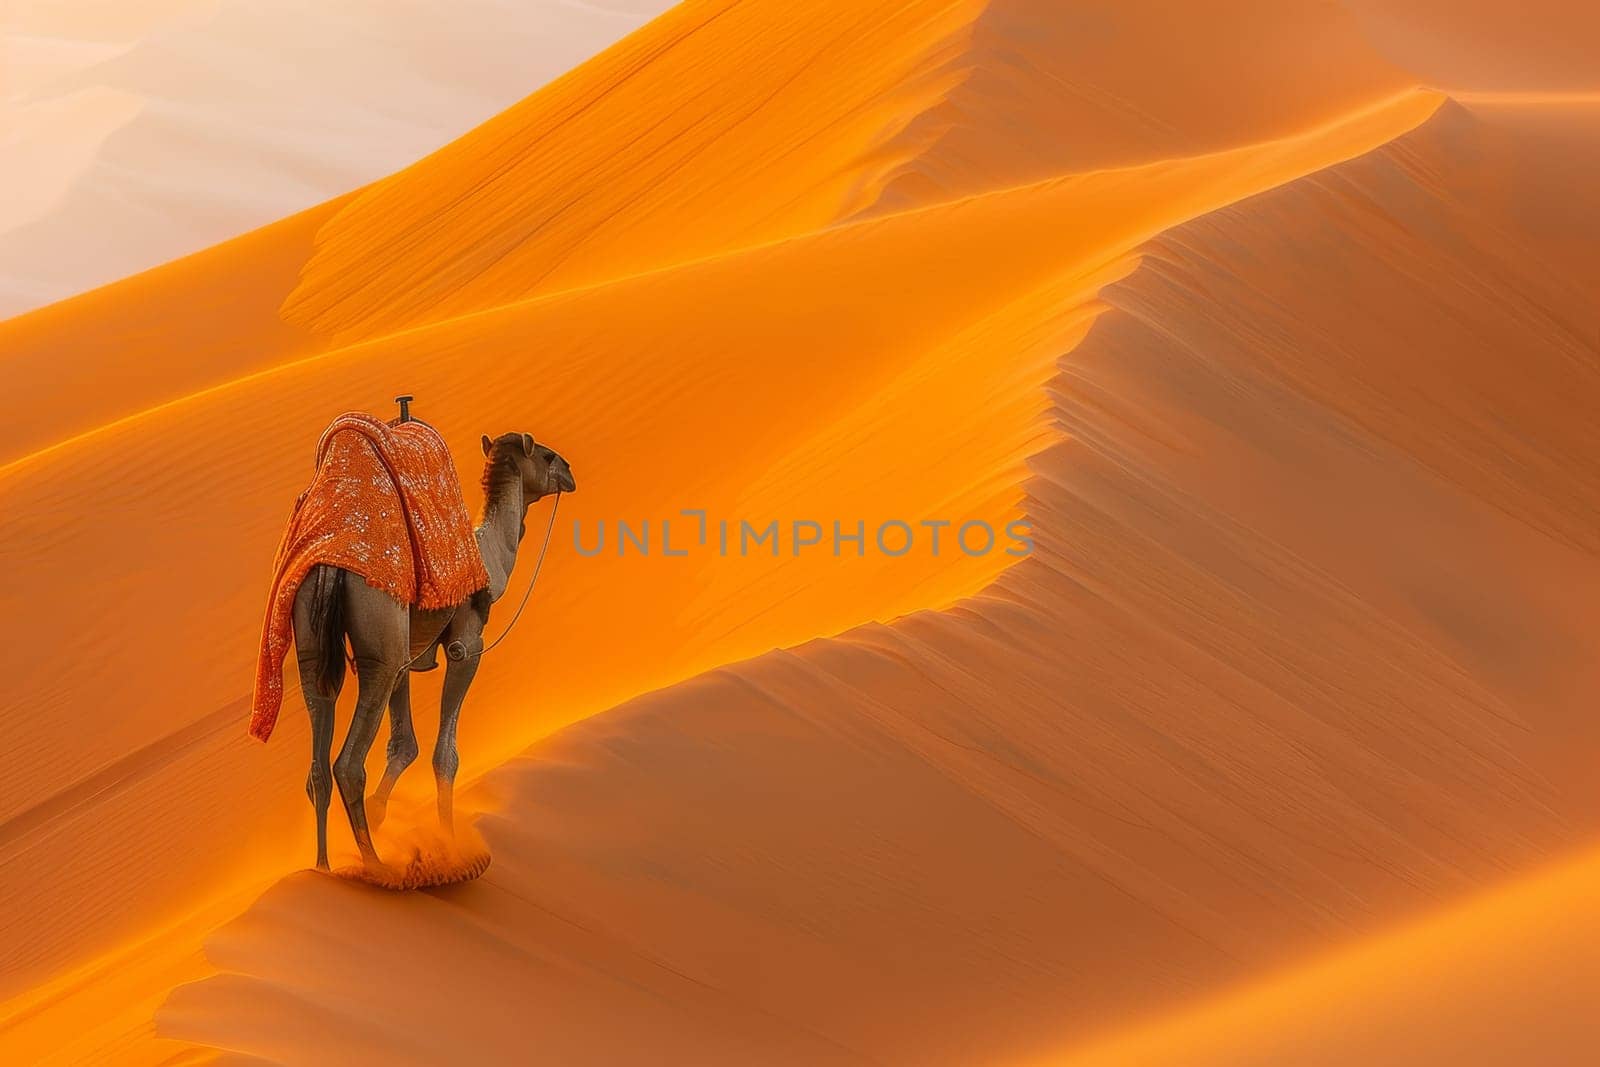 A camel is walking across a sandy desert with a red blanket on its back. The scene is peaceful and serene, with the camel being the only living creature in the vast expanse of sand